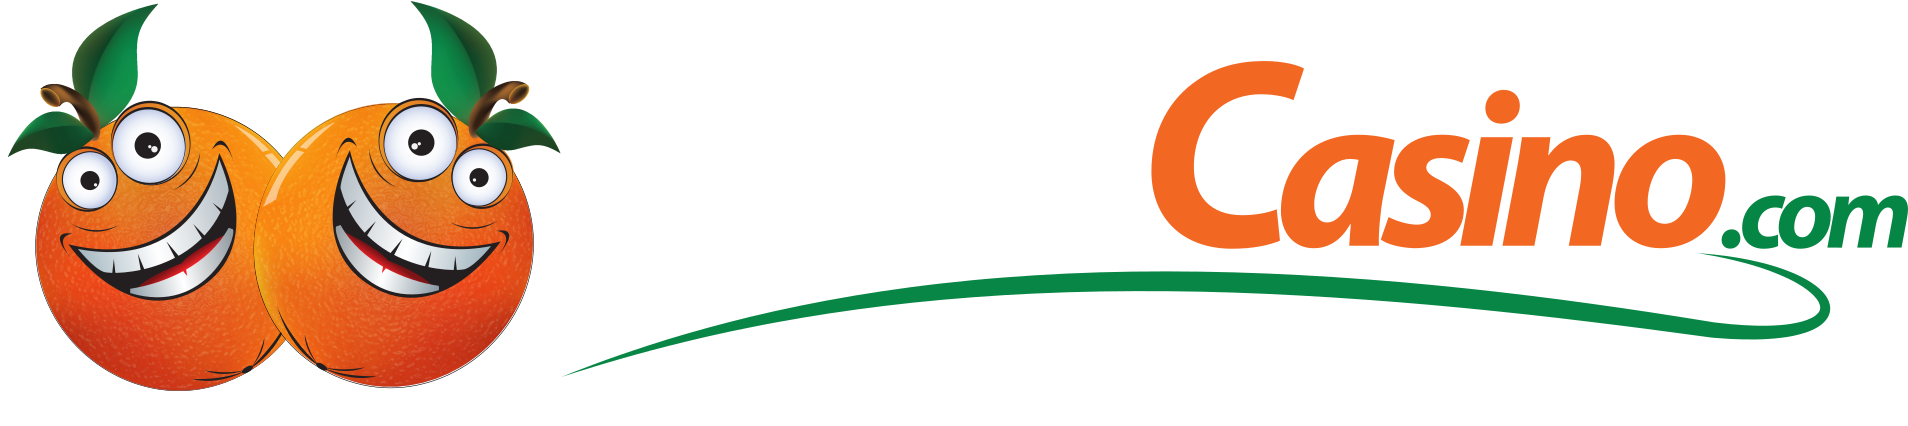 Casino as One of the Certified List of Internet Casinos with at least 300$ match bonus